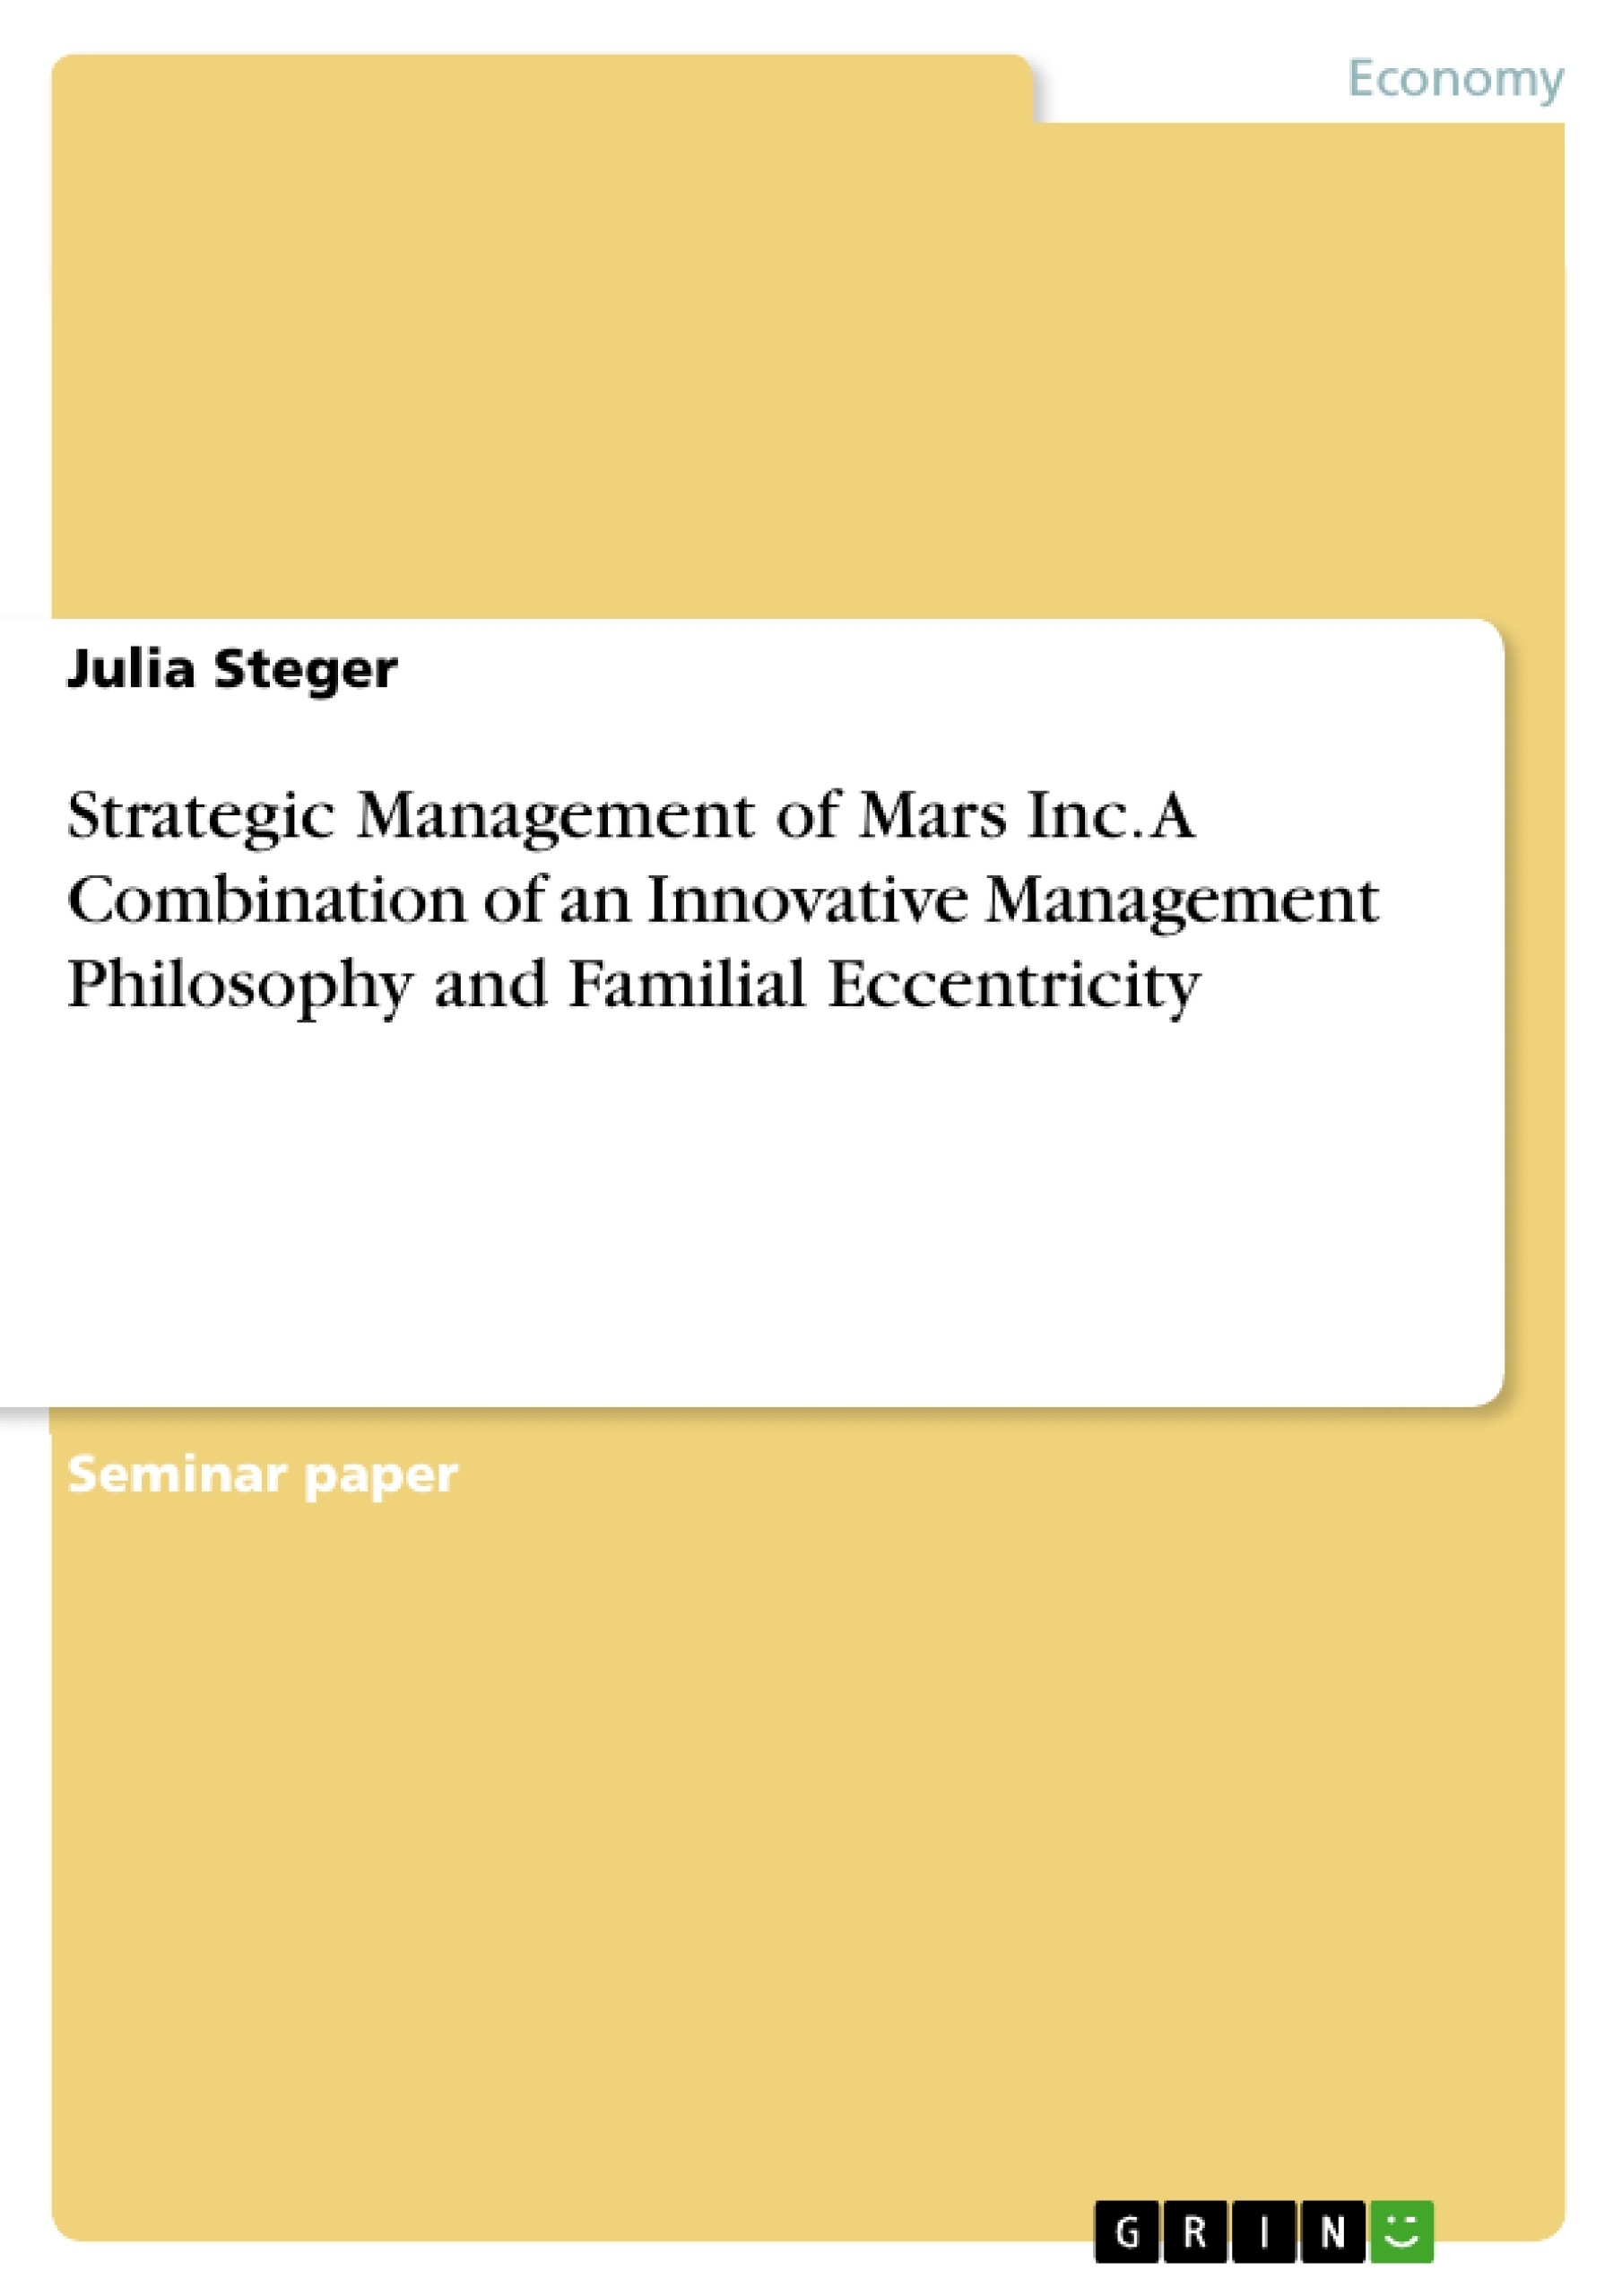 Titre: Strategic Management of Mars Inc. A Combination of an Innovative Management Philosophy and Familial
Eccentricity